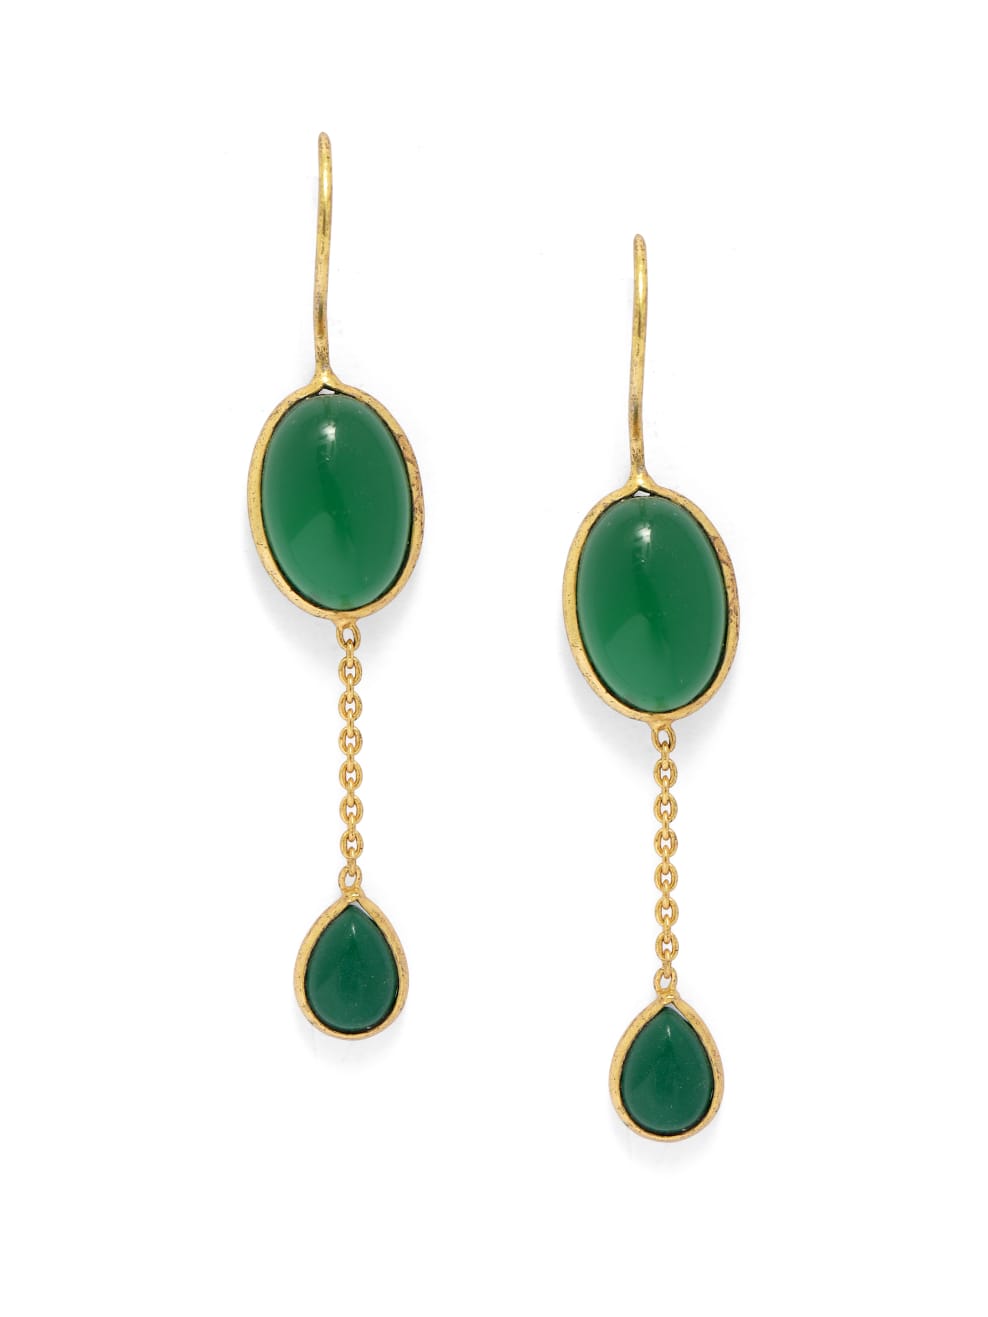 Sterling Silver hook earrings with double Green Onyx stones and chain in micron Gold plating.